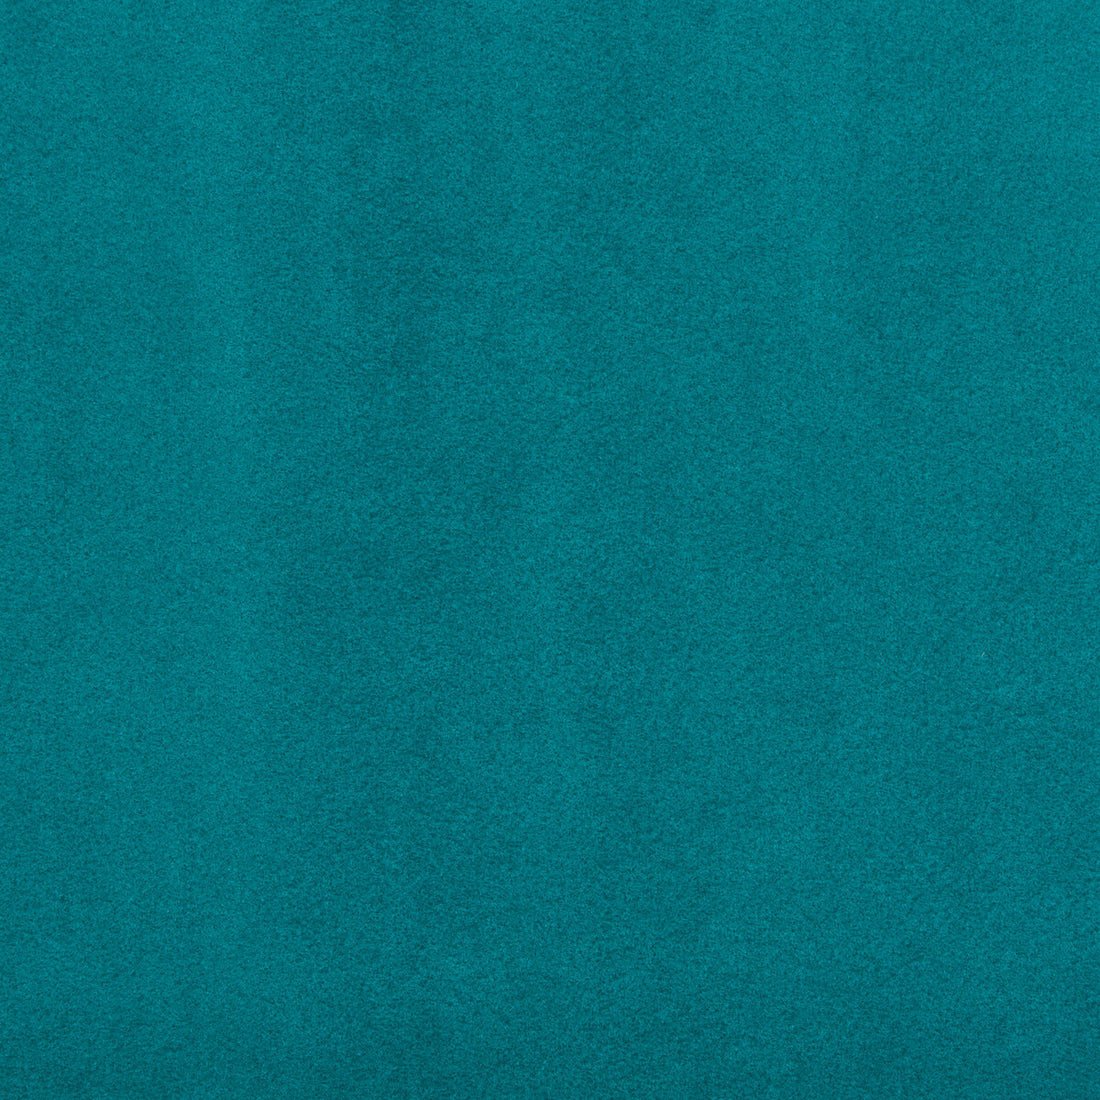 Ultrasuede Green fabric in turquoise color - pattern 30787.13.0 - by Kravet Design in the Performance collection